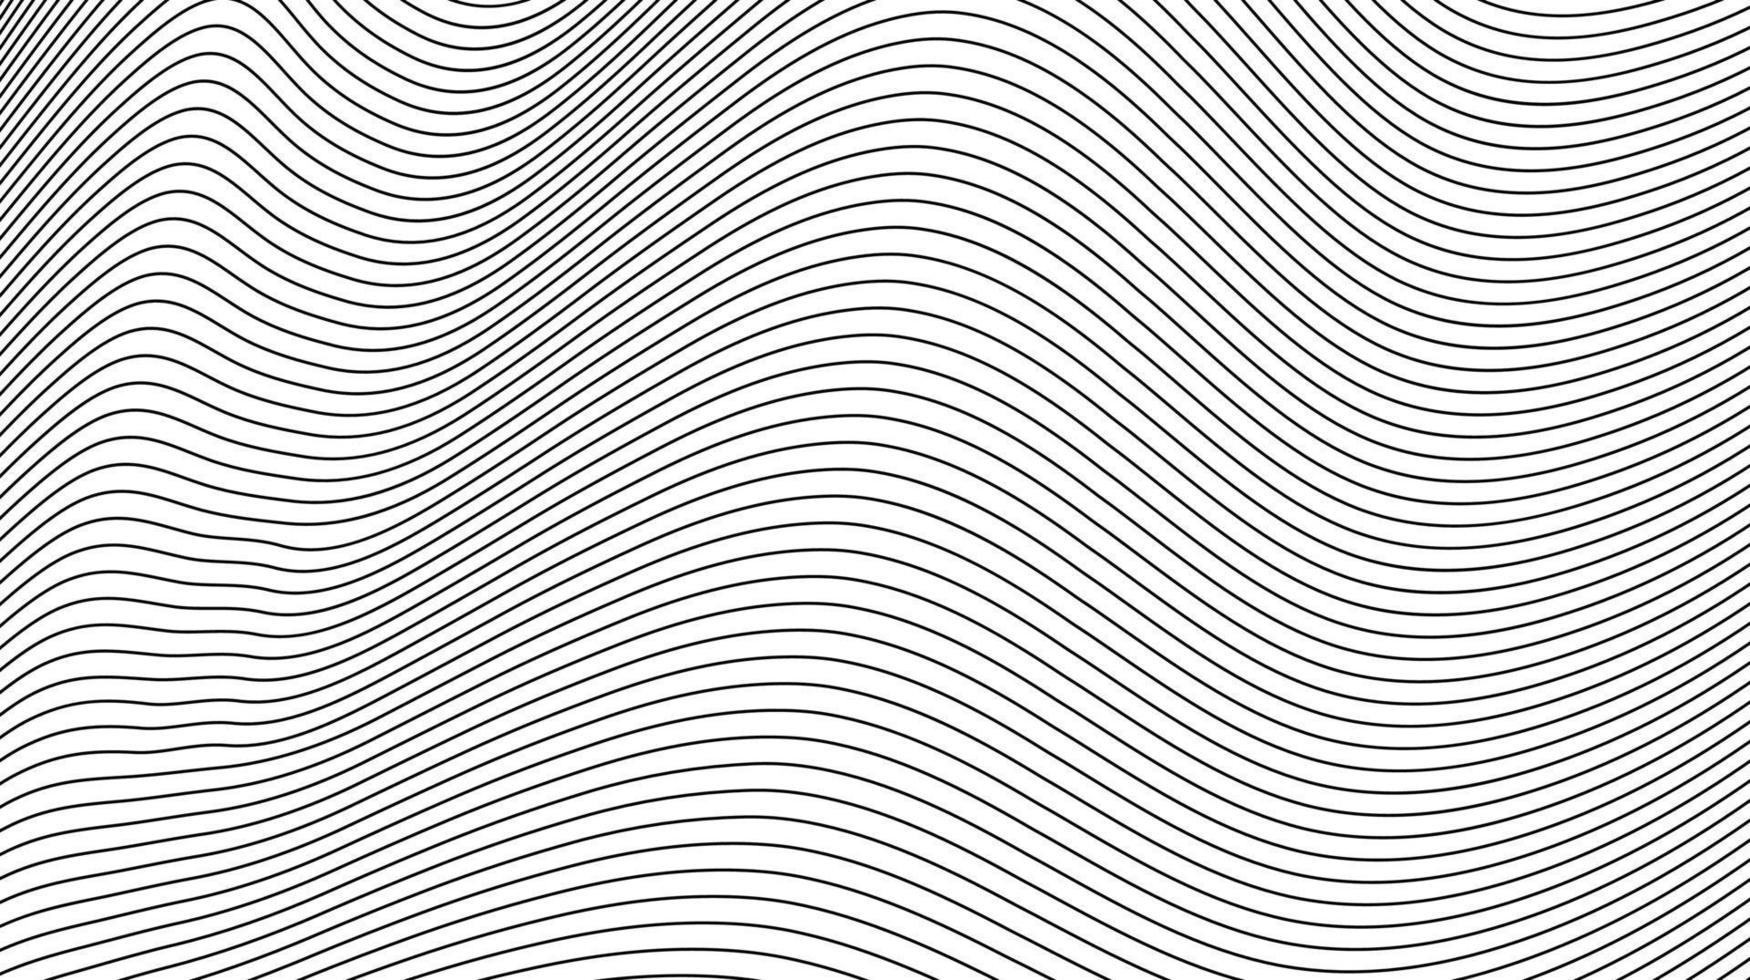 Abstract background made of curved lines vector